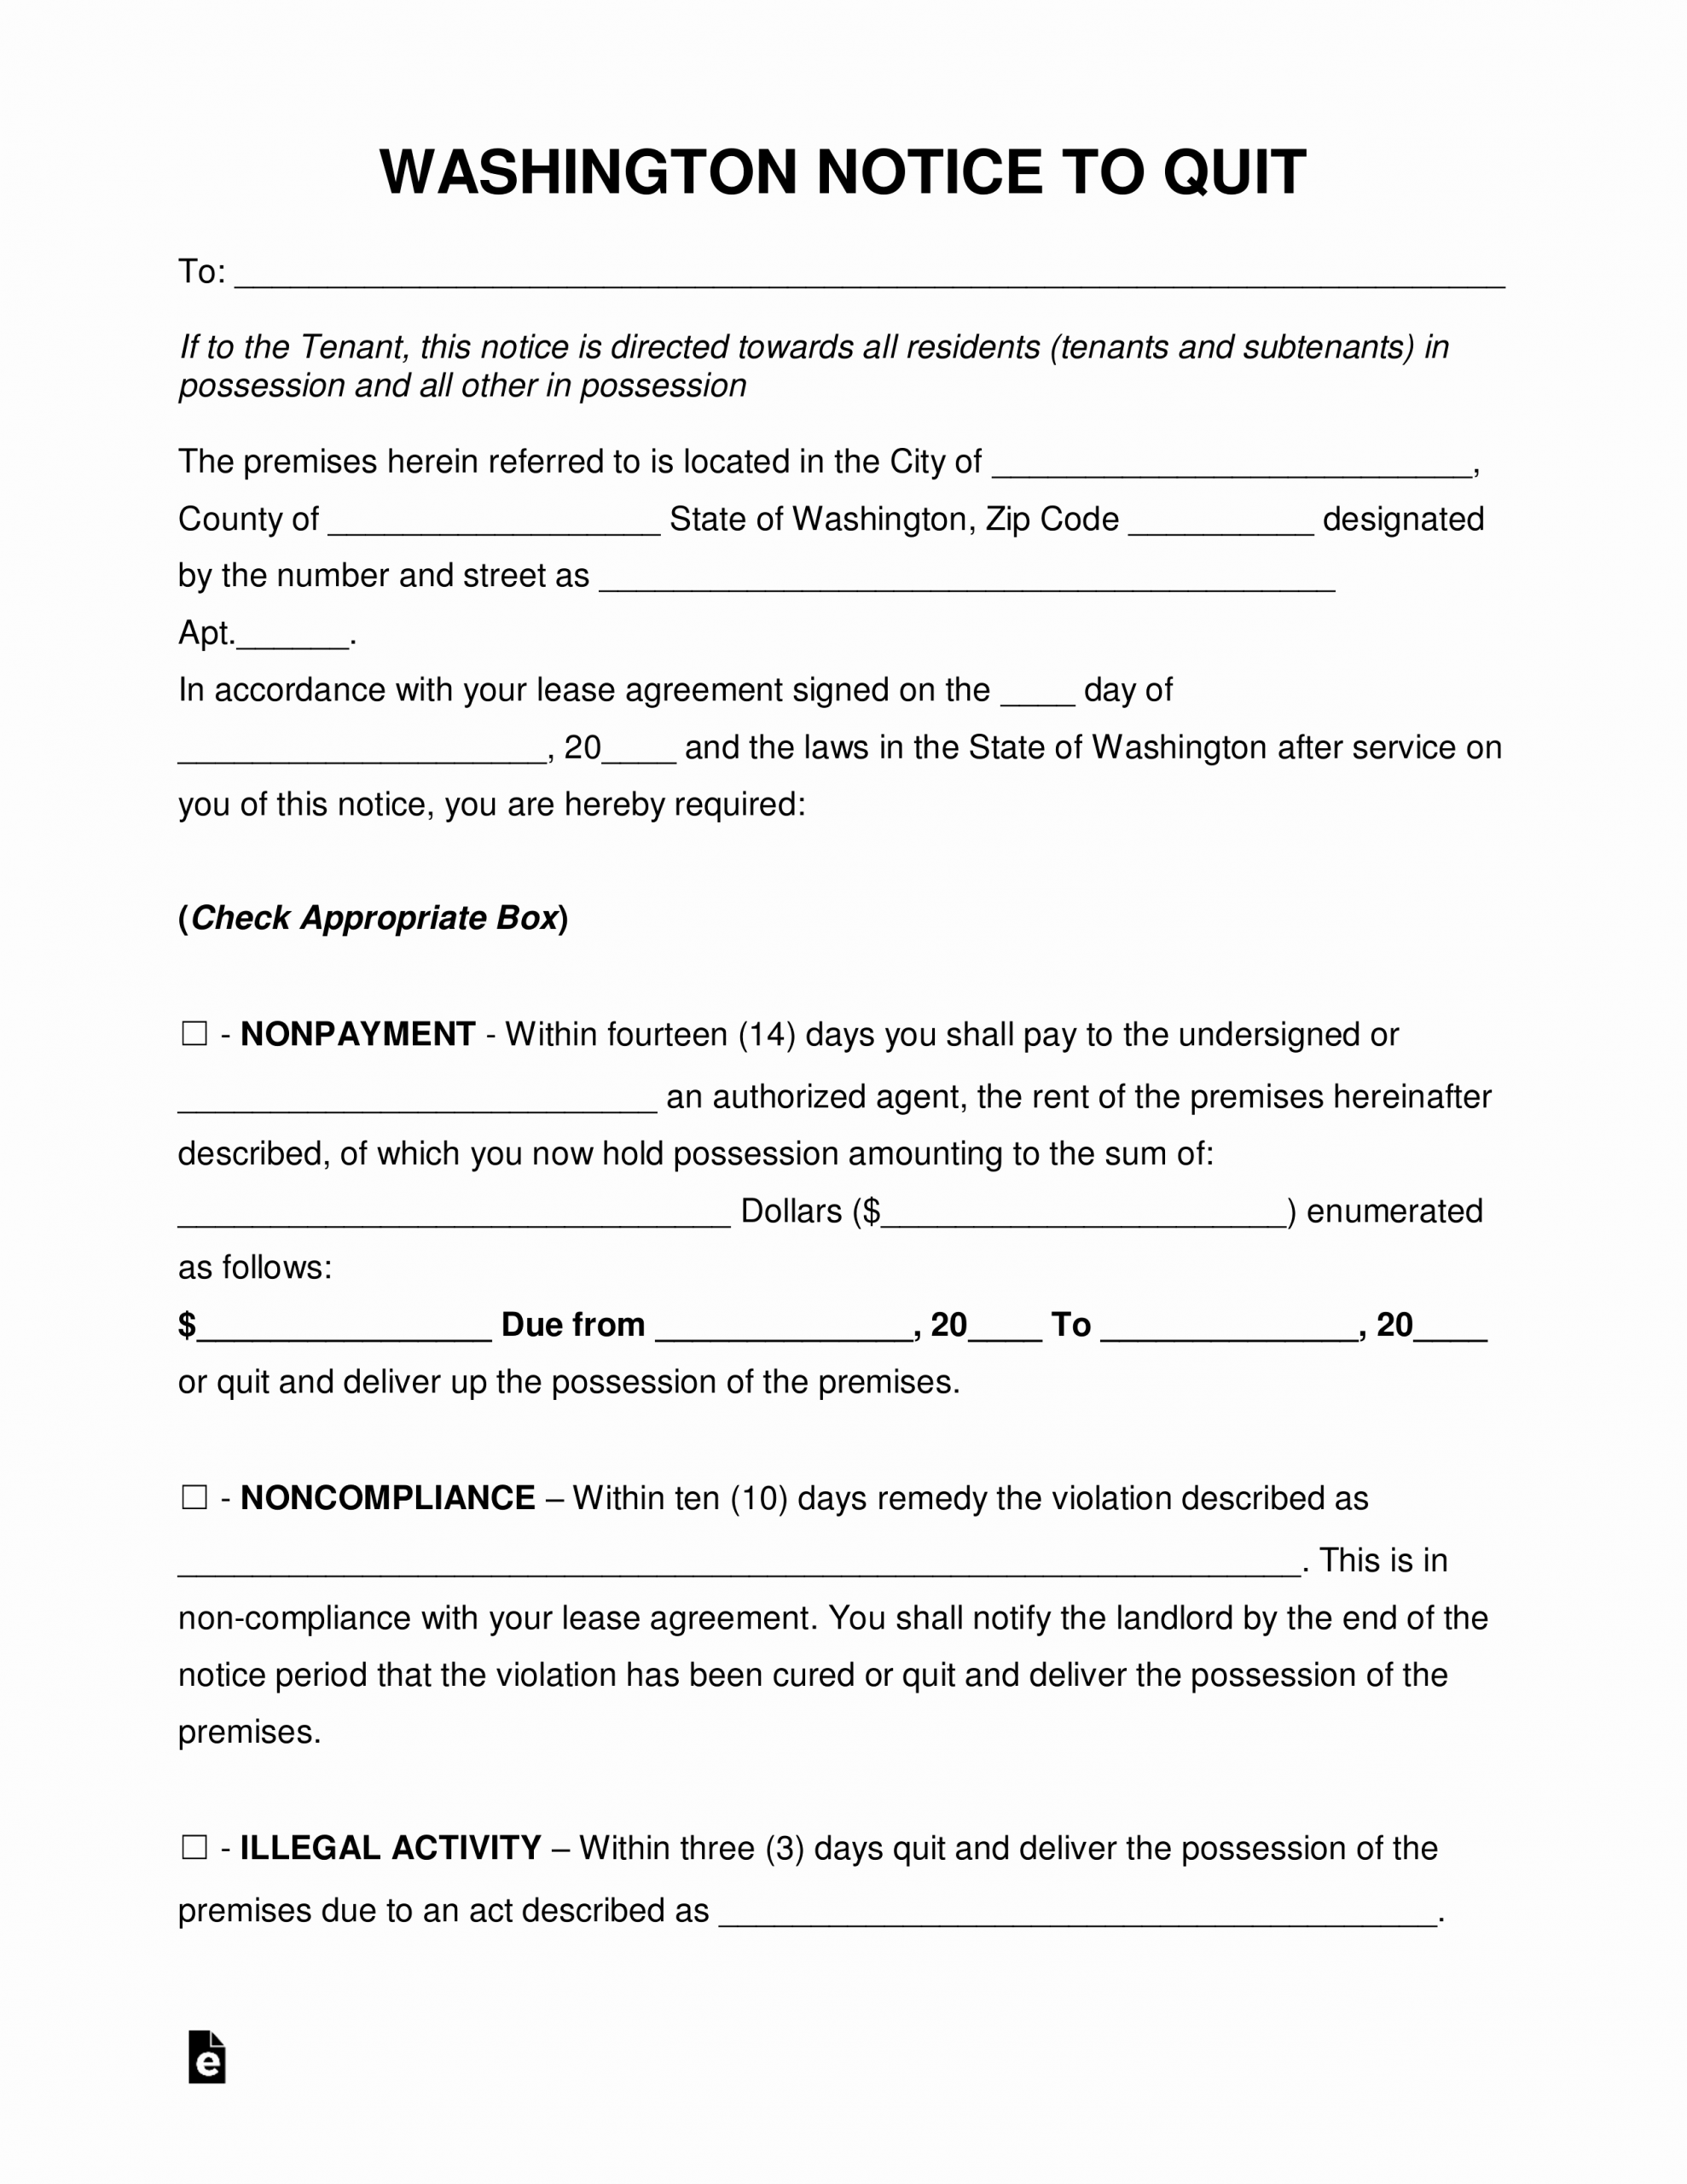 Eviction Notice Template Alabama Best Of Free Washington Eviction Notice forms